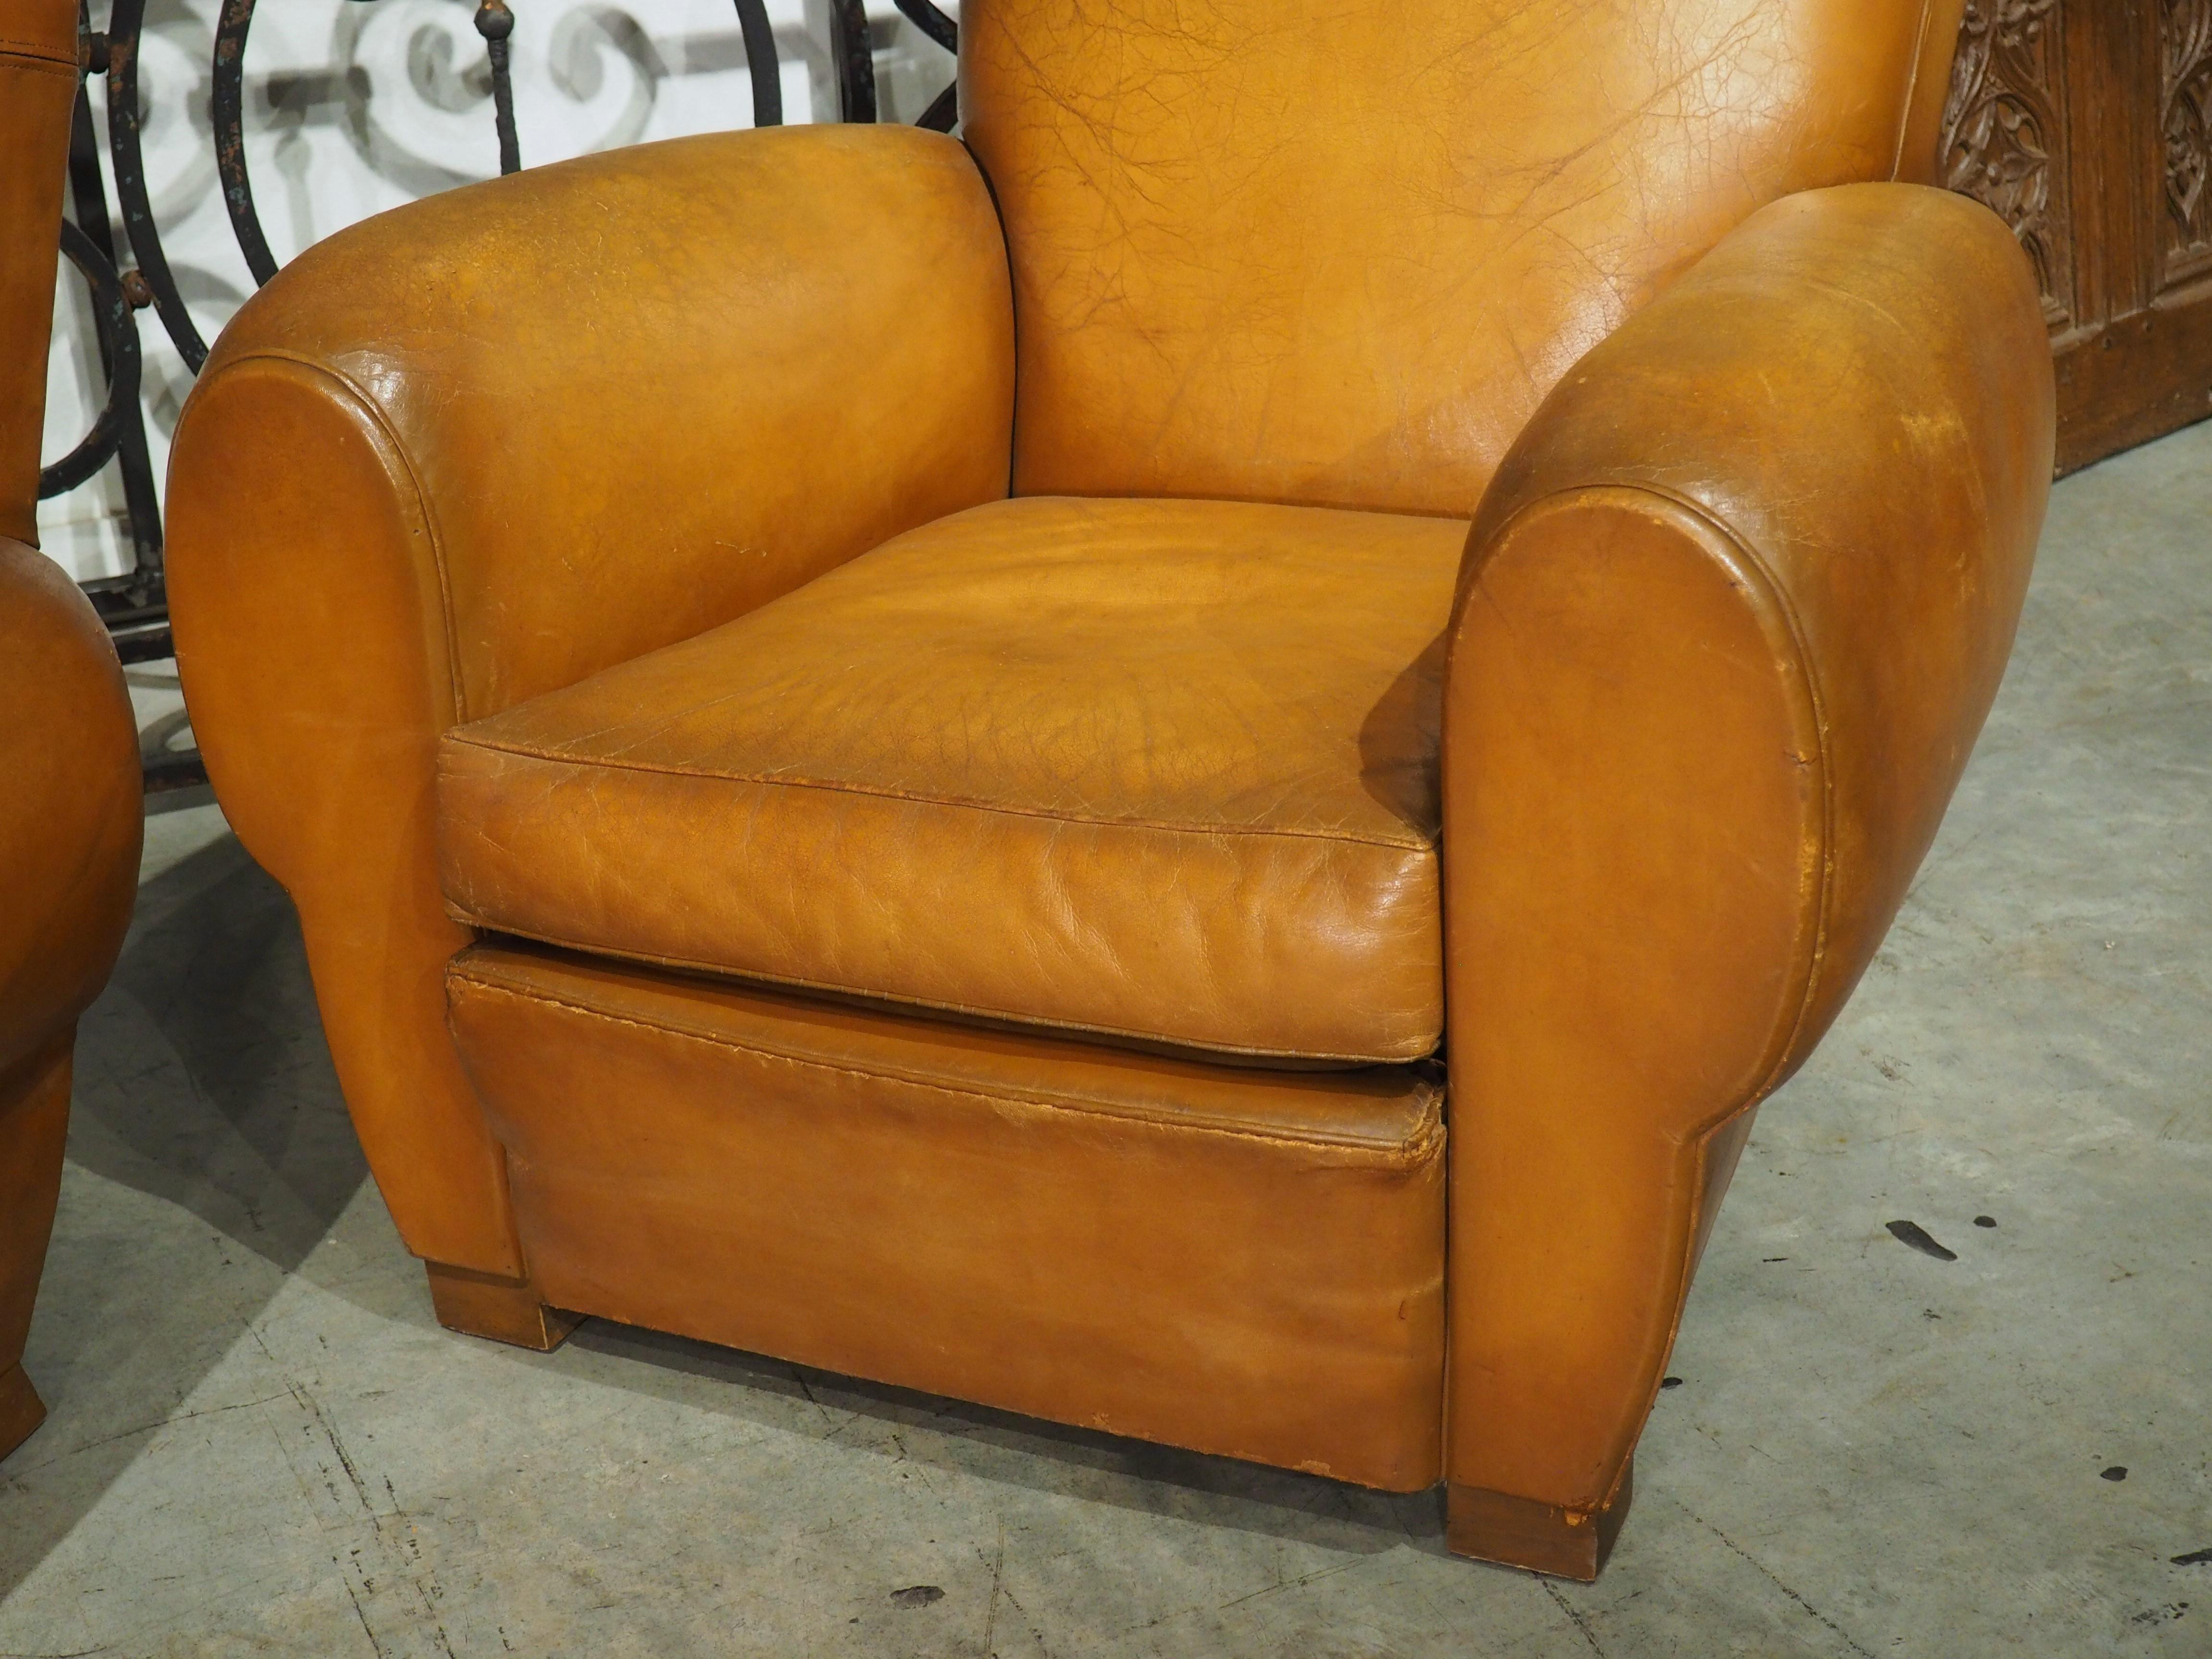 Club chairs, which are armchairs completely covered in leather, first appeared in France at the beginning of the 20th century. Originally called fauteuil comfortable (“comfortable armchairs”), authentic club chairs are covered in sheepskin leather.